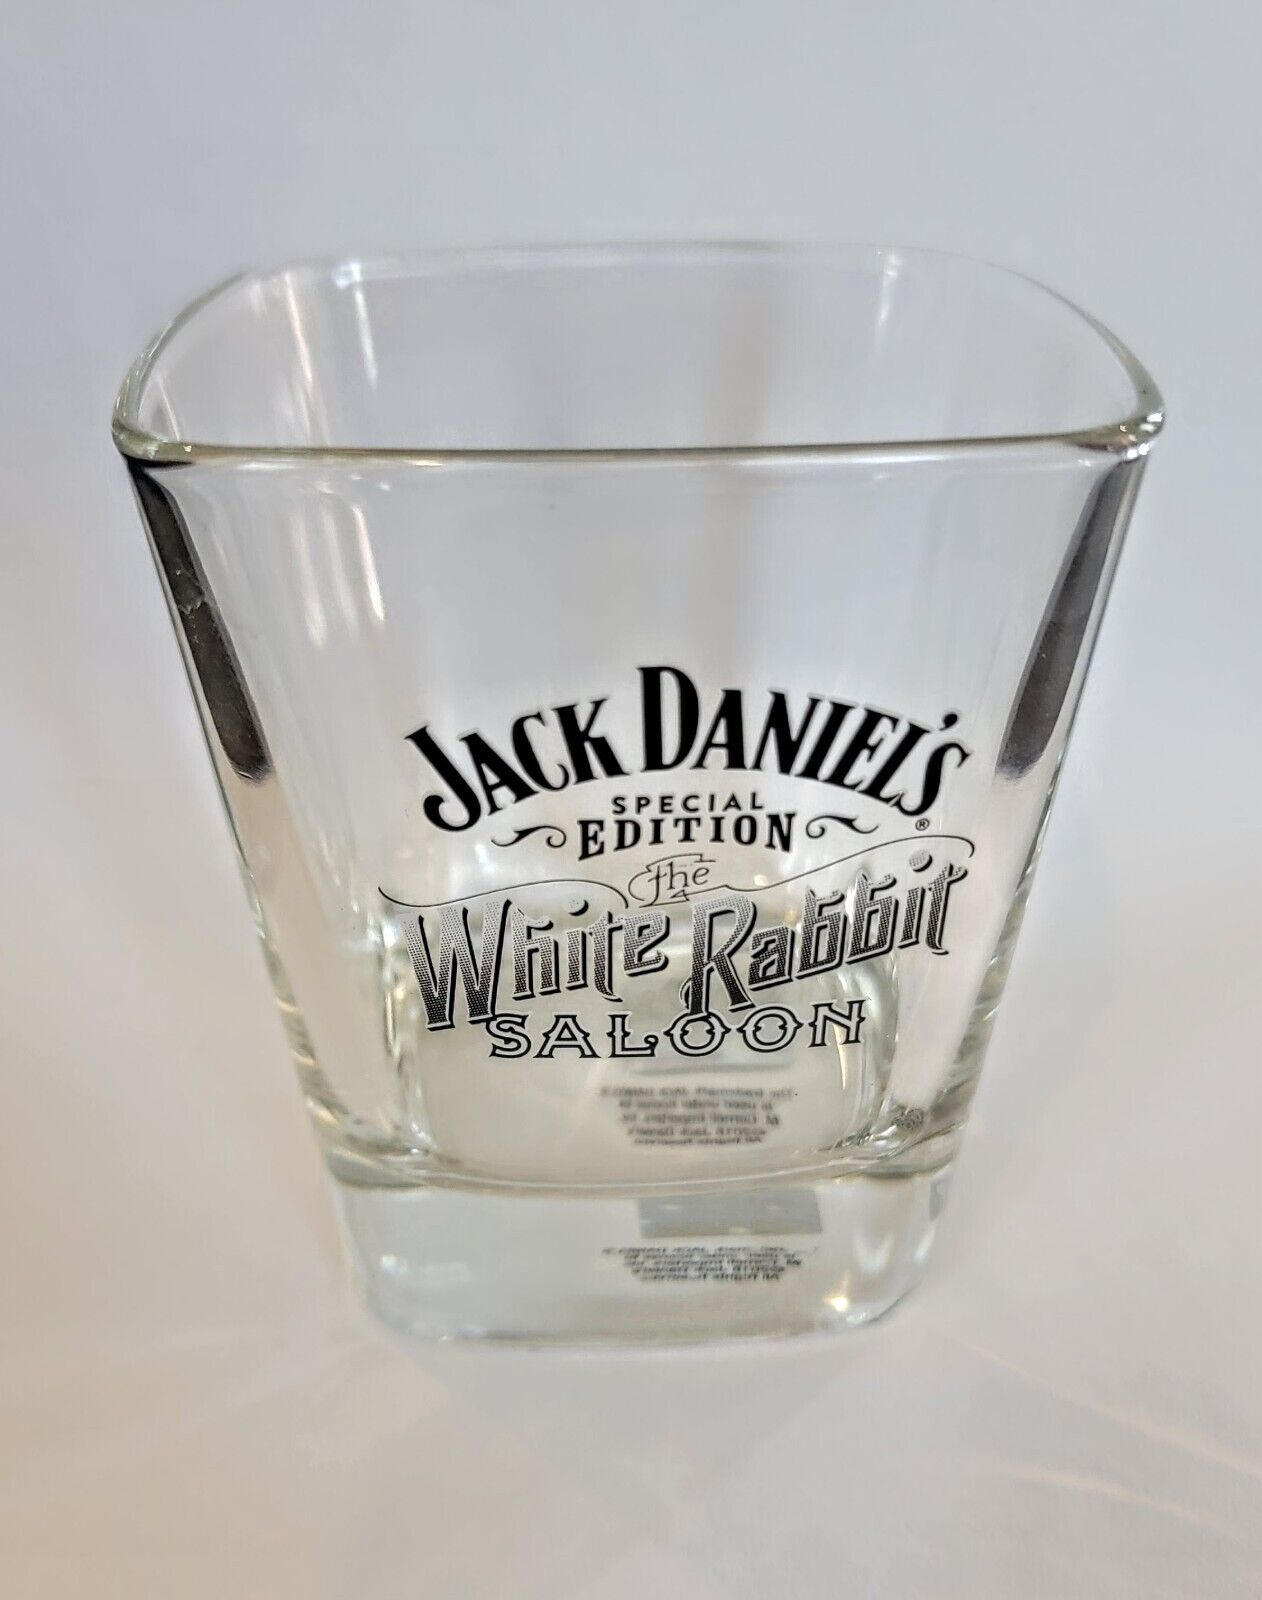 Jack Daniels White Rabbit Double Old Fashioned Glass 14 OZ (Square) - New in Box